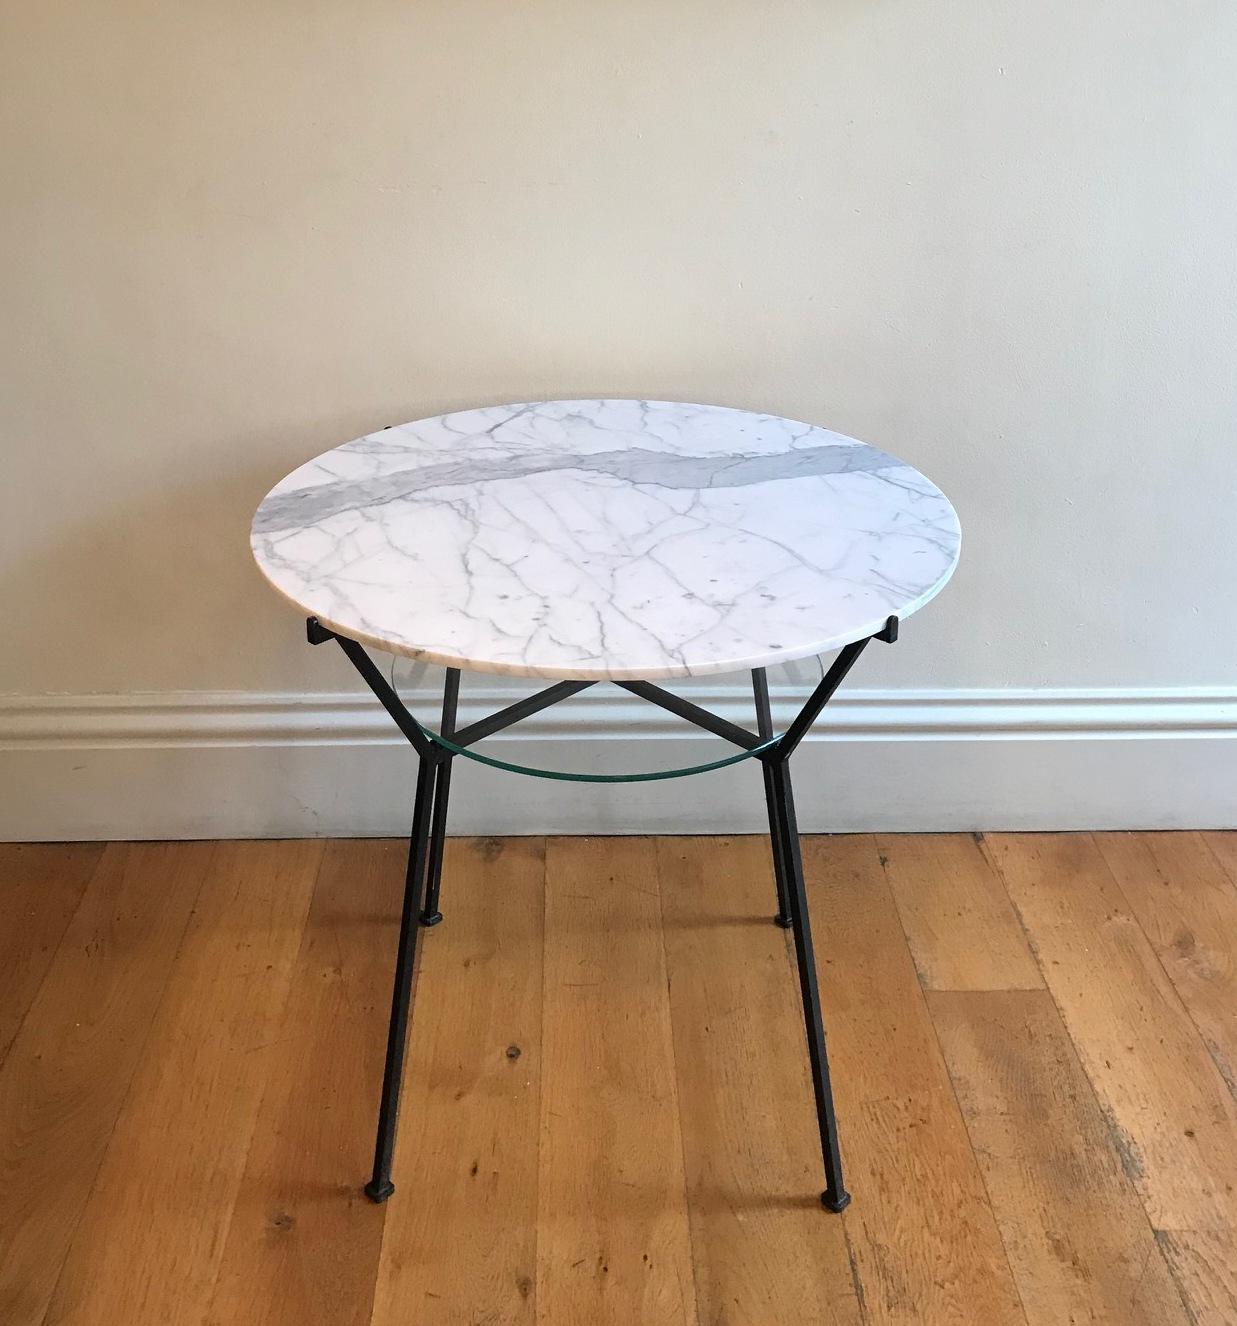 A painted black iron two-tier side table. With circular Carrara marble top (replaced) and clear glass shelf. Designed by the French, 20th century designer Charles Ramos.